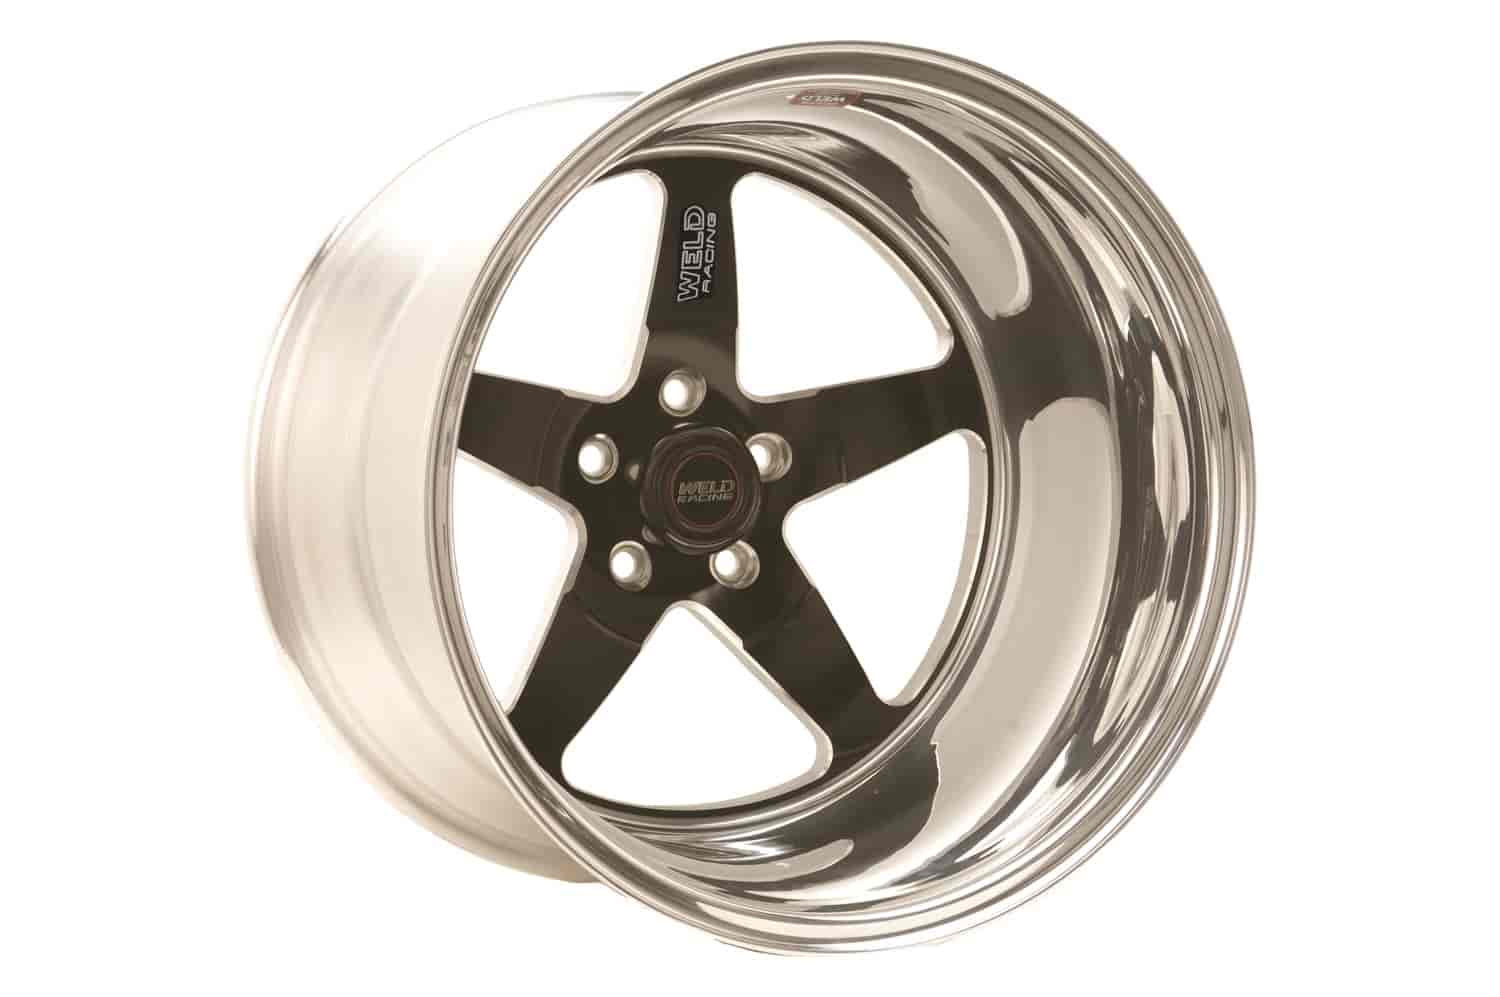 RT-S Series S71 Wheel Size: 15" x 4" Bolt Circle: 5 x 4-1/2" Back Space: 2.50"